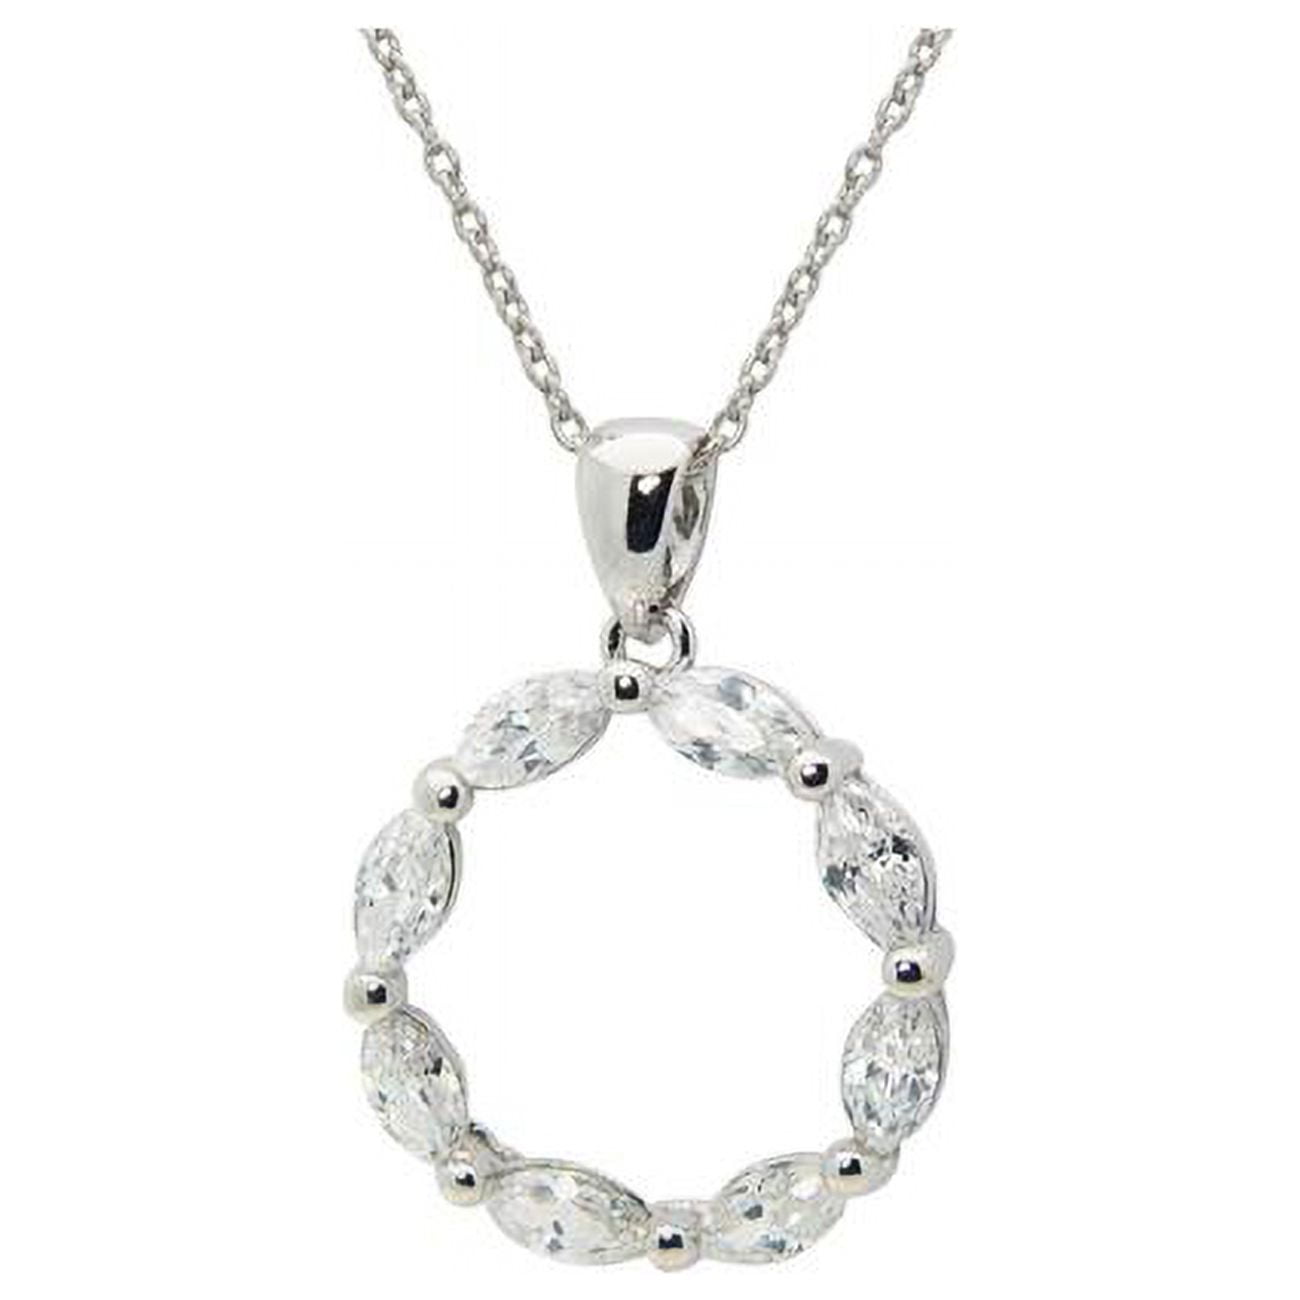 521150 16 In. Eternity Bridal Necklace In 925 Sterling Silver